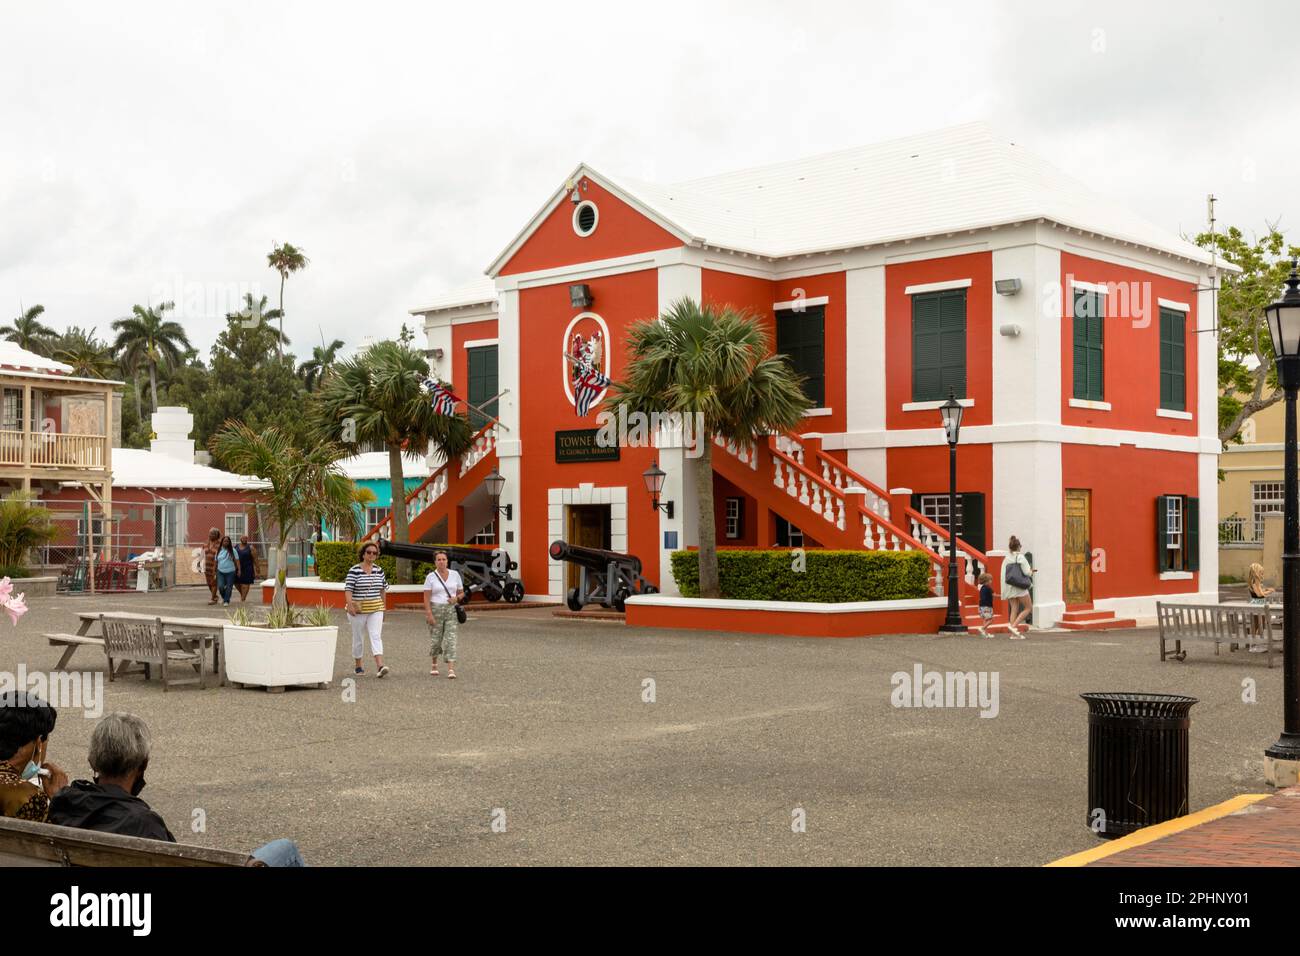 The charming city hall building is seen in St. George, Bermuda Stock Photo